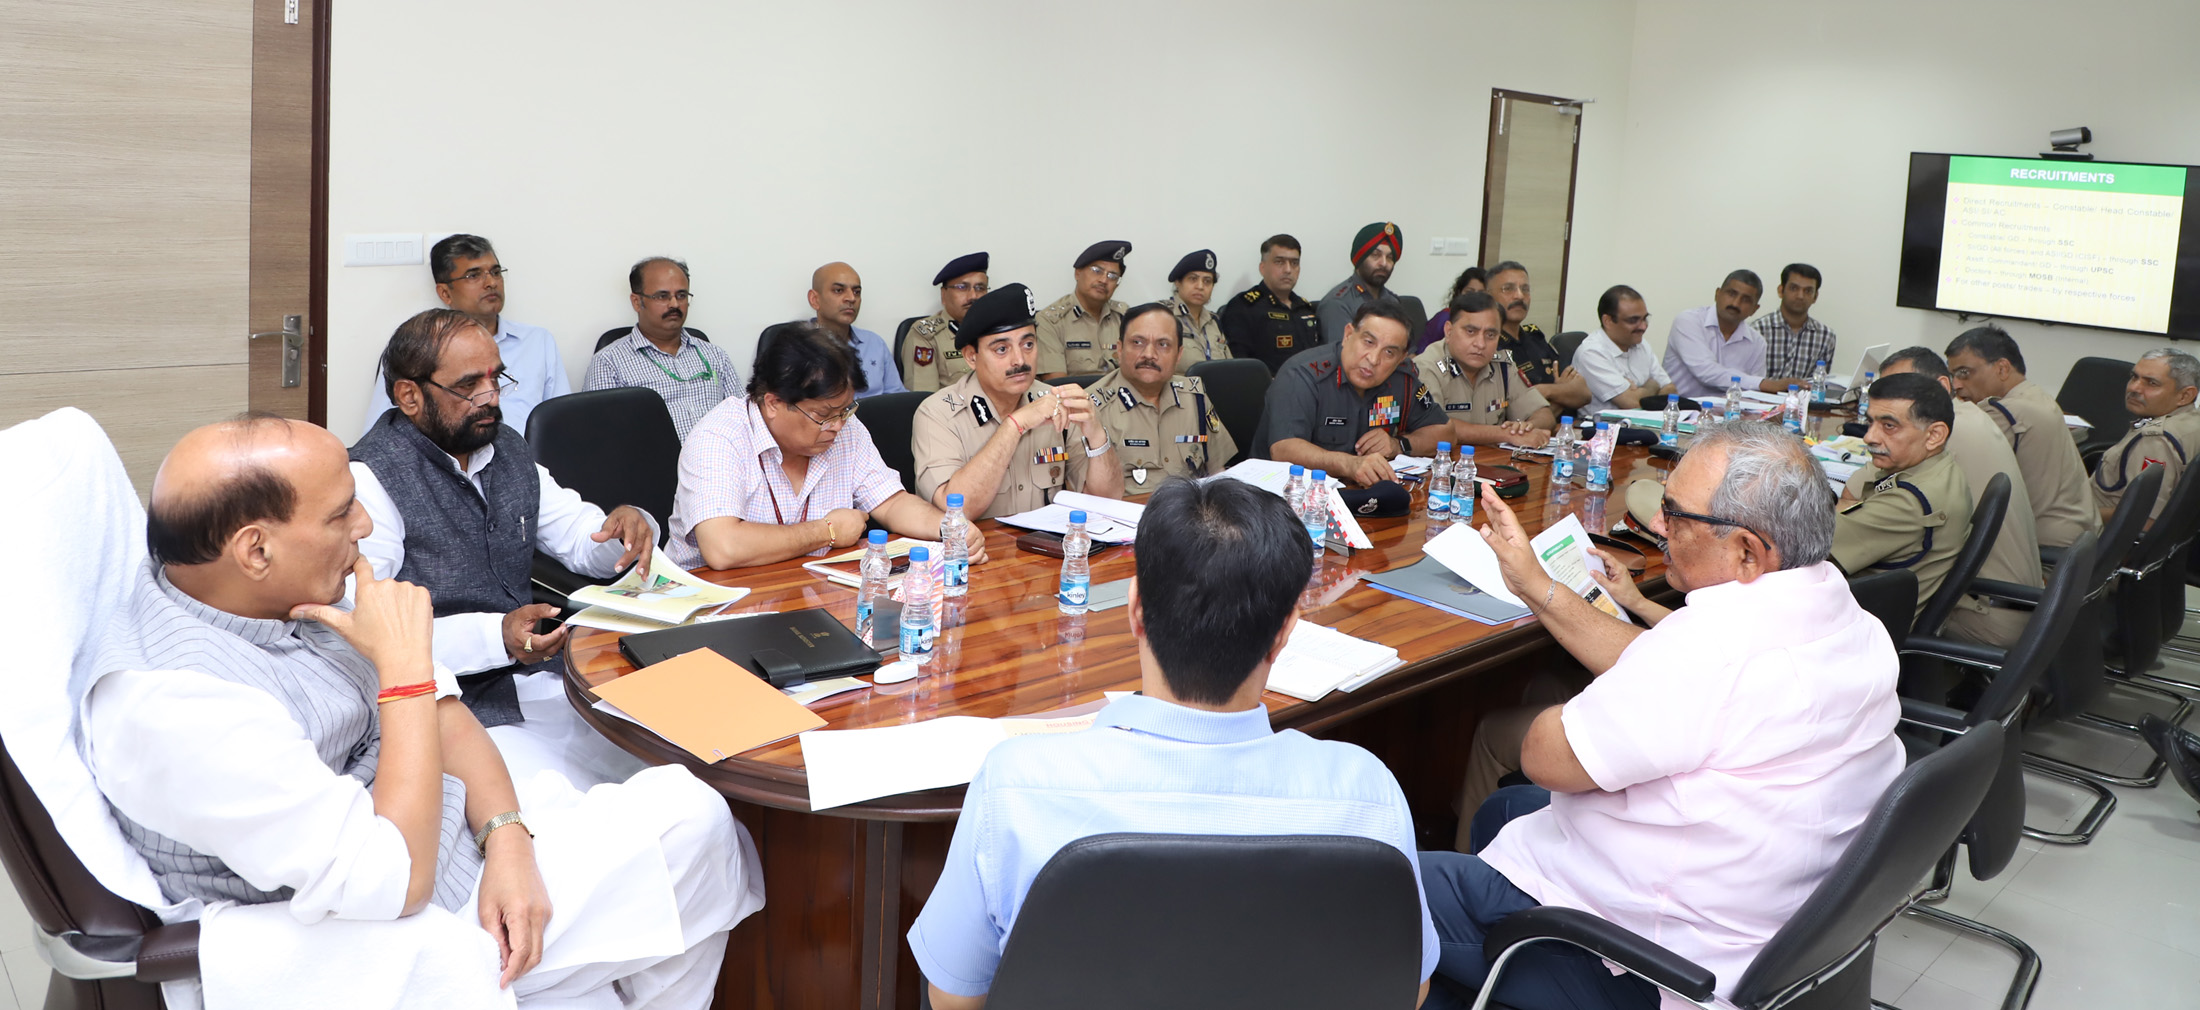 The Union Home Minister, Shri Rajnath Singh chairing a review meeting with the Directors-General (DGs) of Central Armed Police Forces (CAPFs), in New Delhi on August 03, 2017. The Minister of State for Home Affairs, Shri Hansraj Gangaram Ahir and senior officers of MHA are also seen.